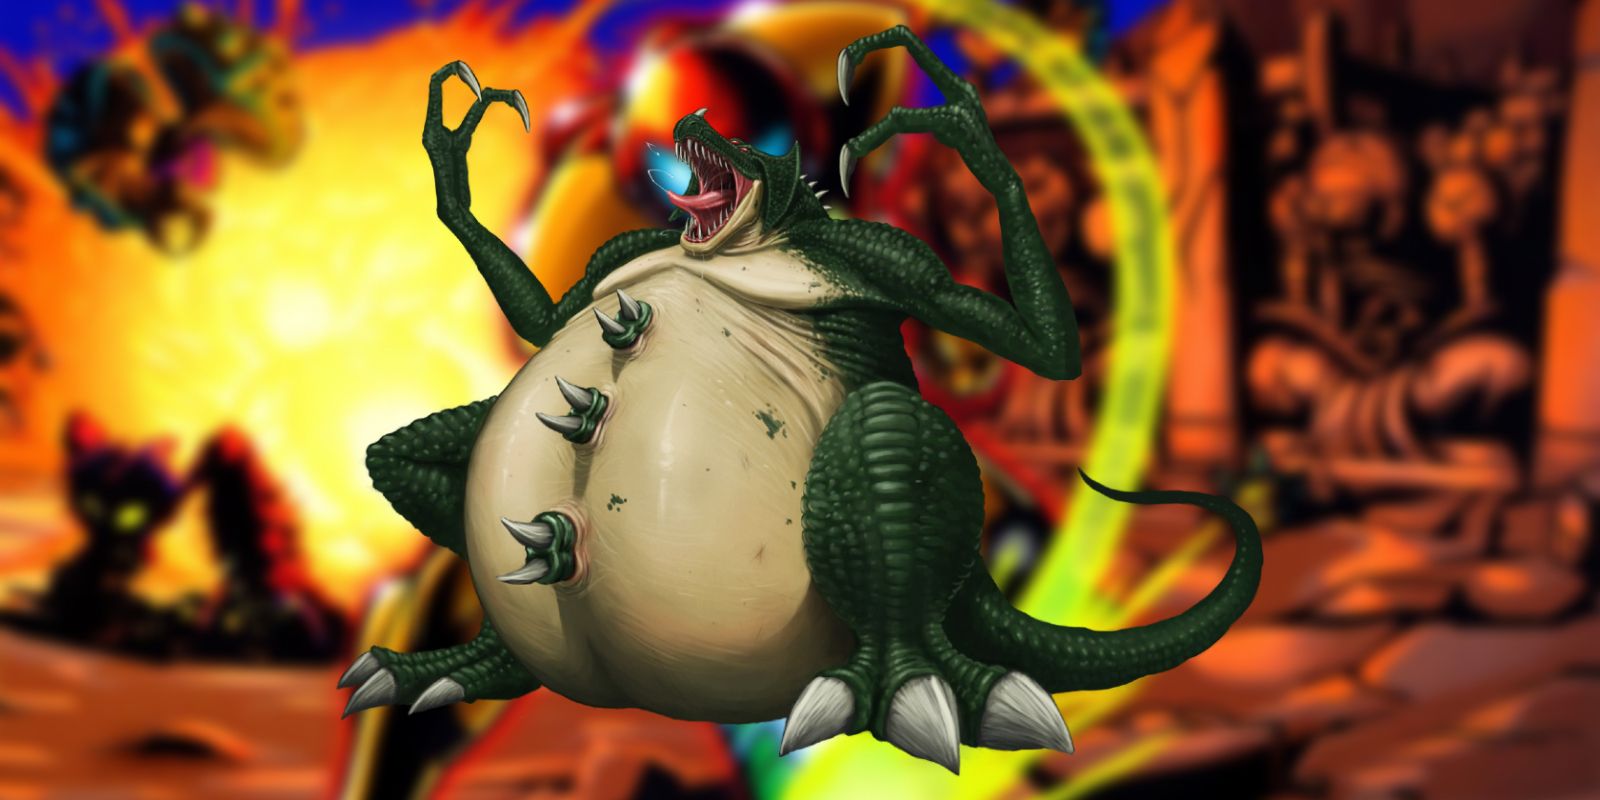 Kraid's first appeared in the original Metroid